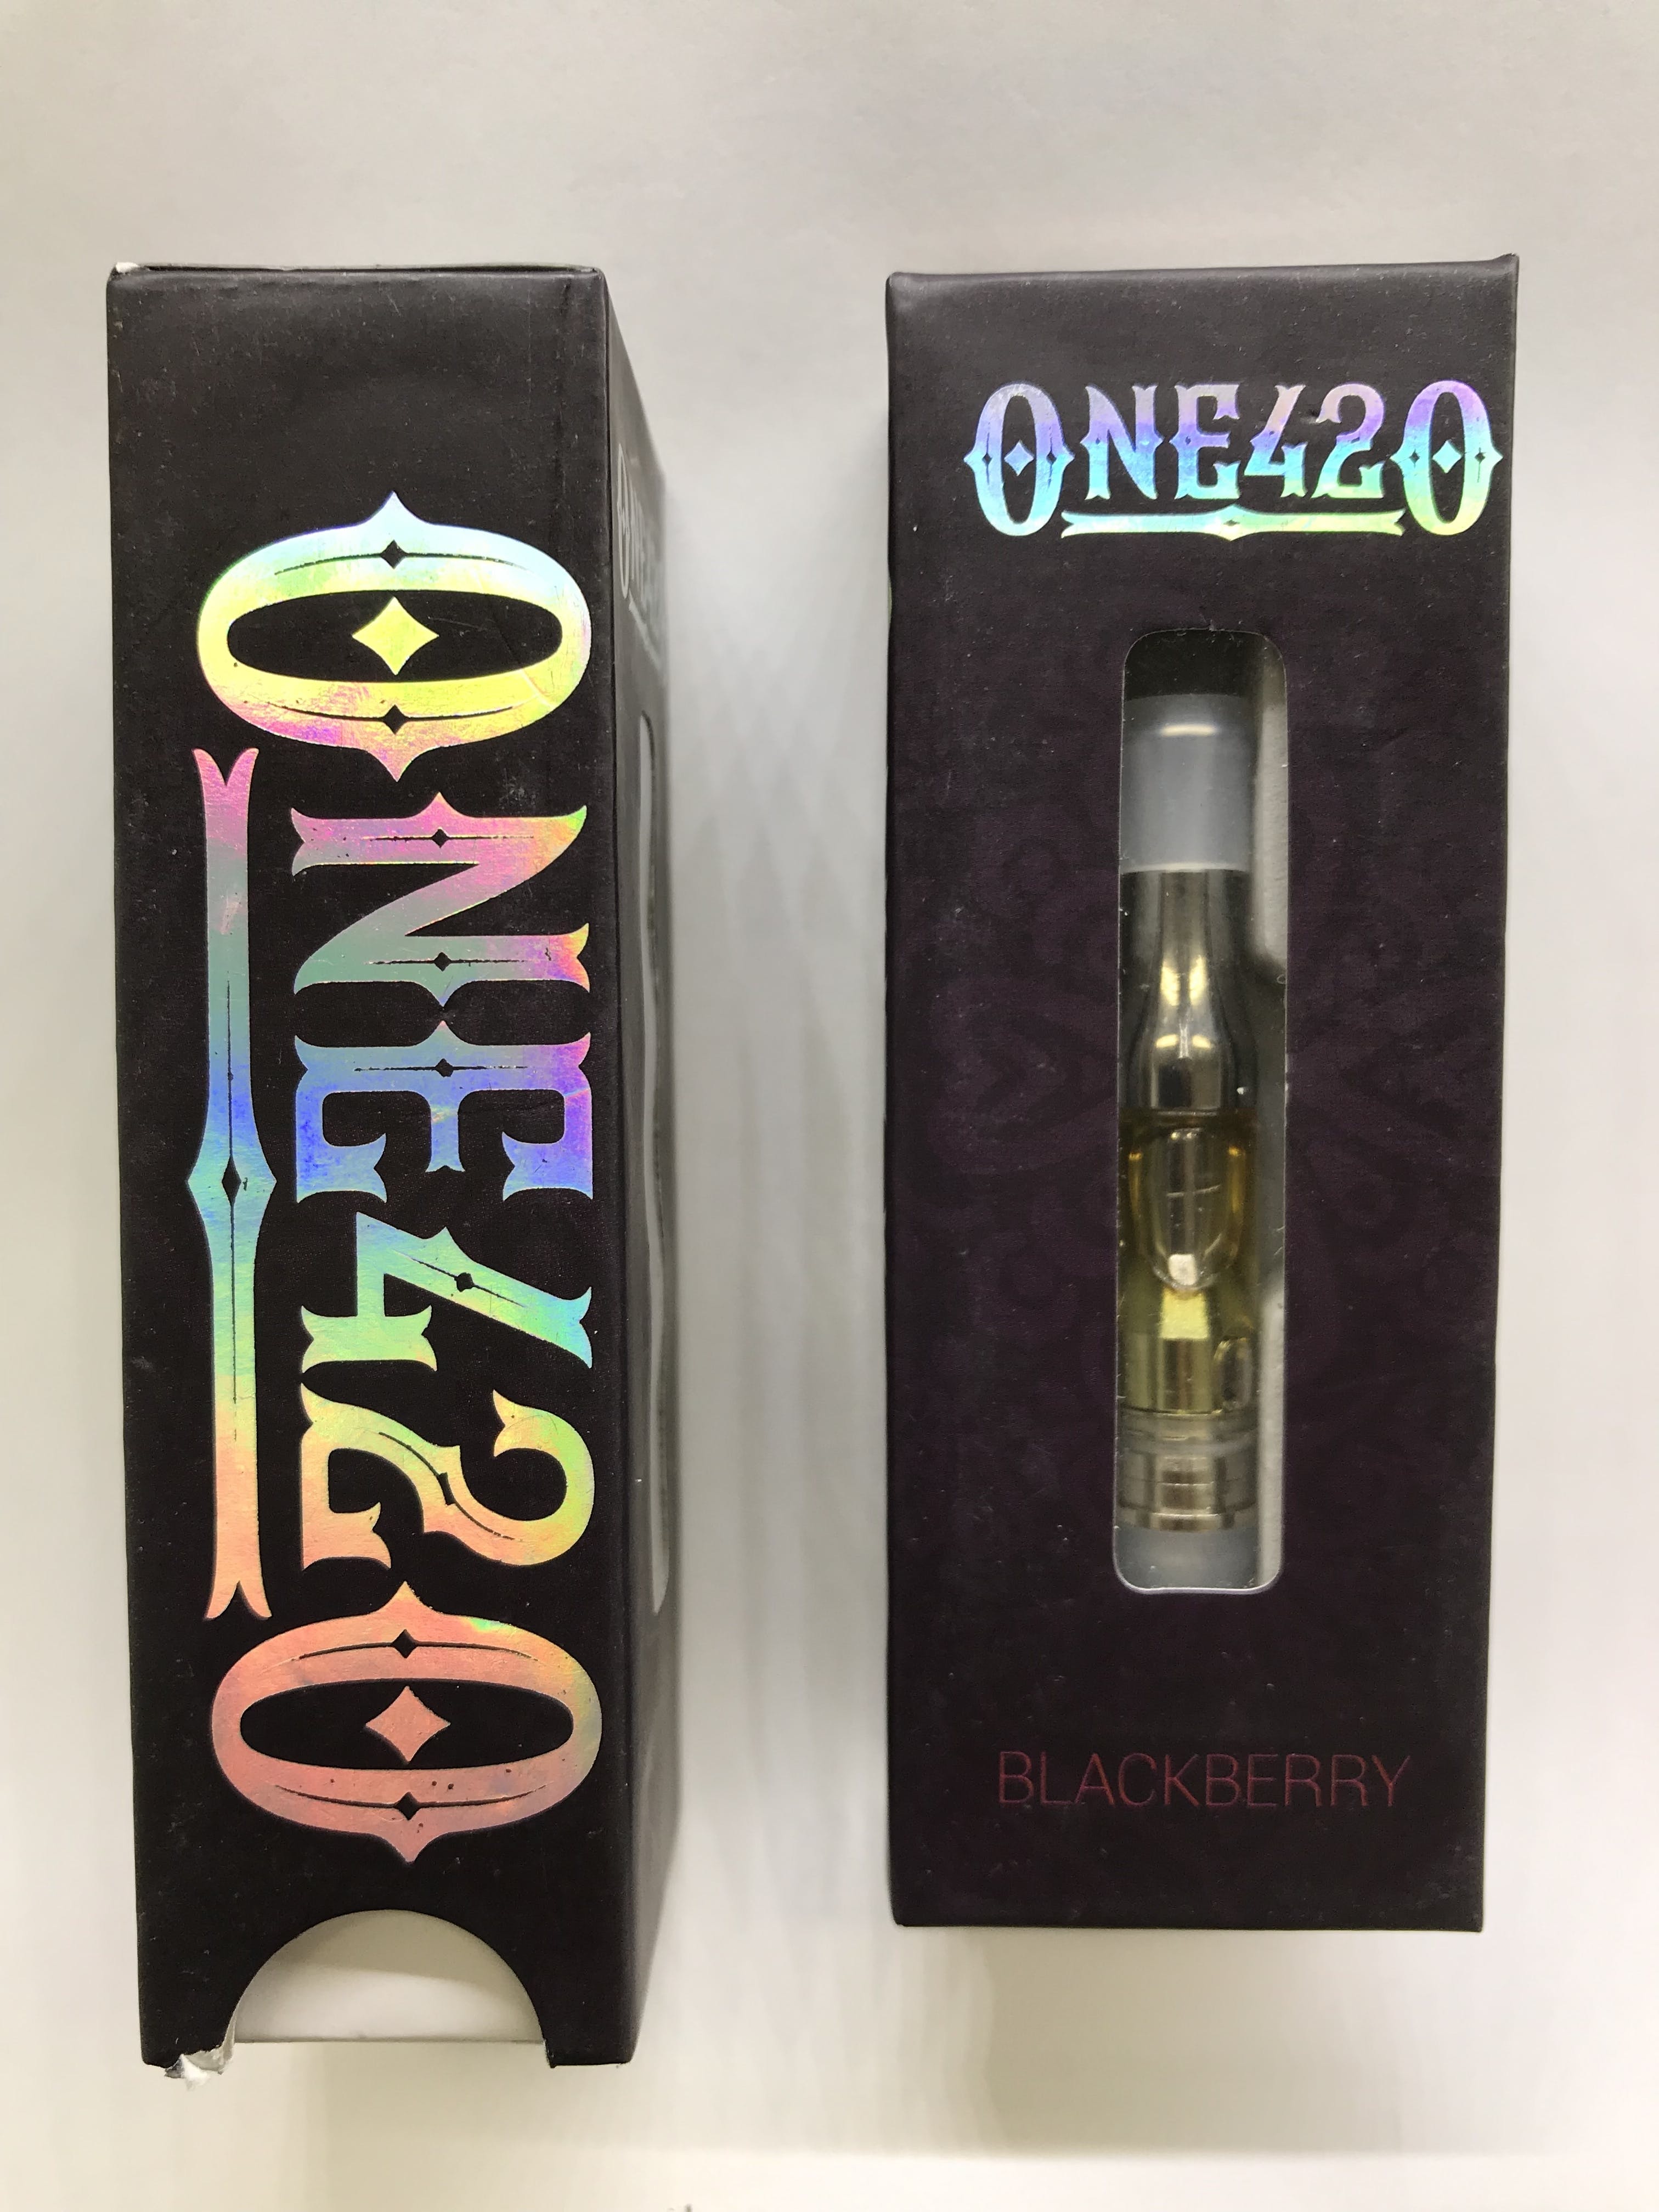 concentrate-one420-indica-cartridges